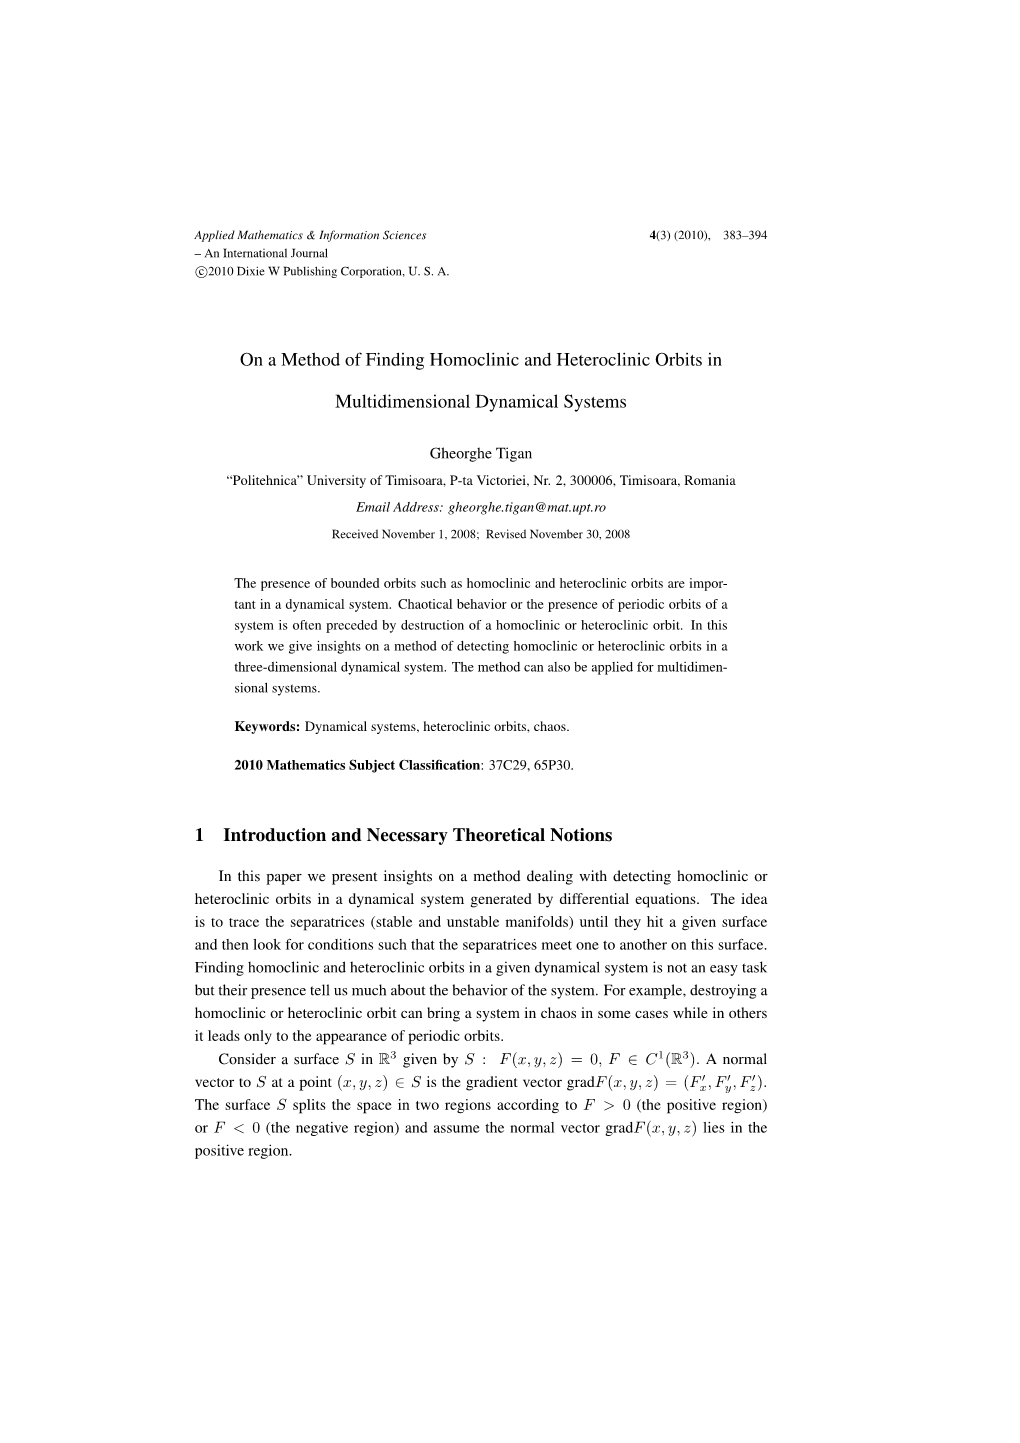 On a Method of Finding Homoclinic and Heteroclinic Orbits in Multidimensional Dynamical Systems 1 Introduction and Necessary the -.:: Natural Sciences Publishing